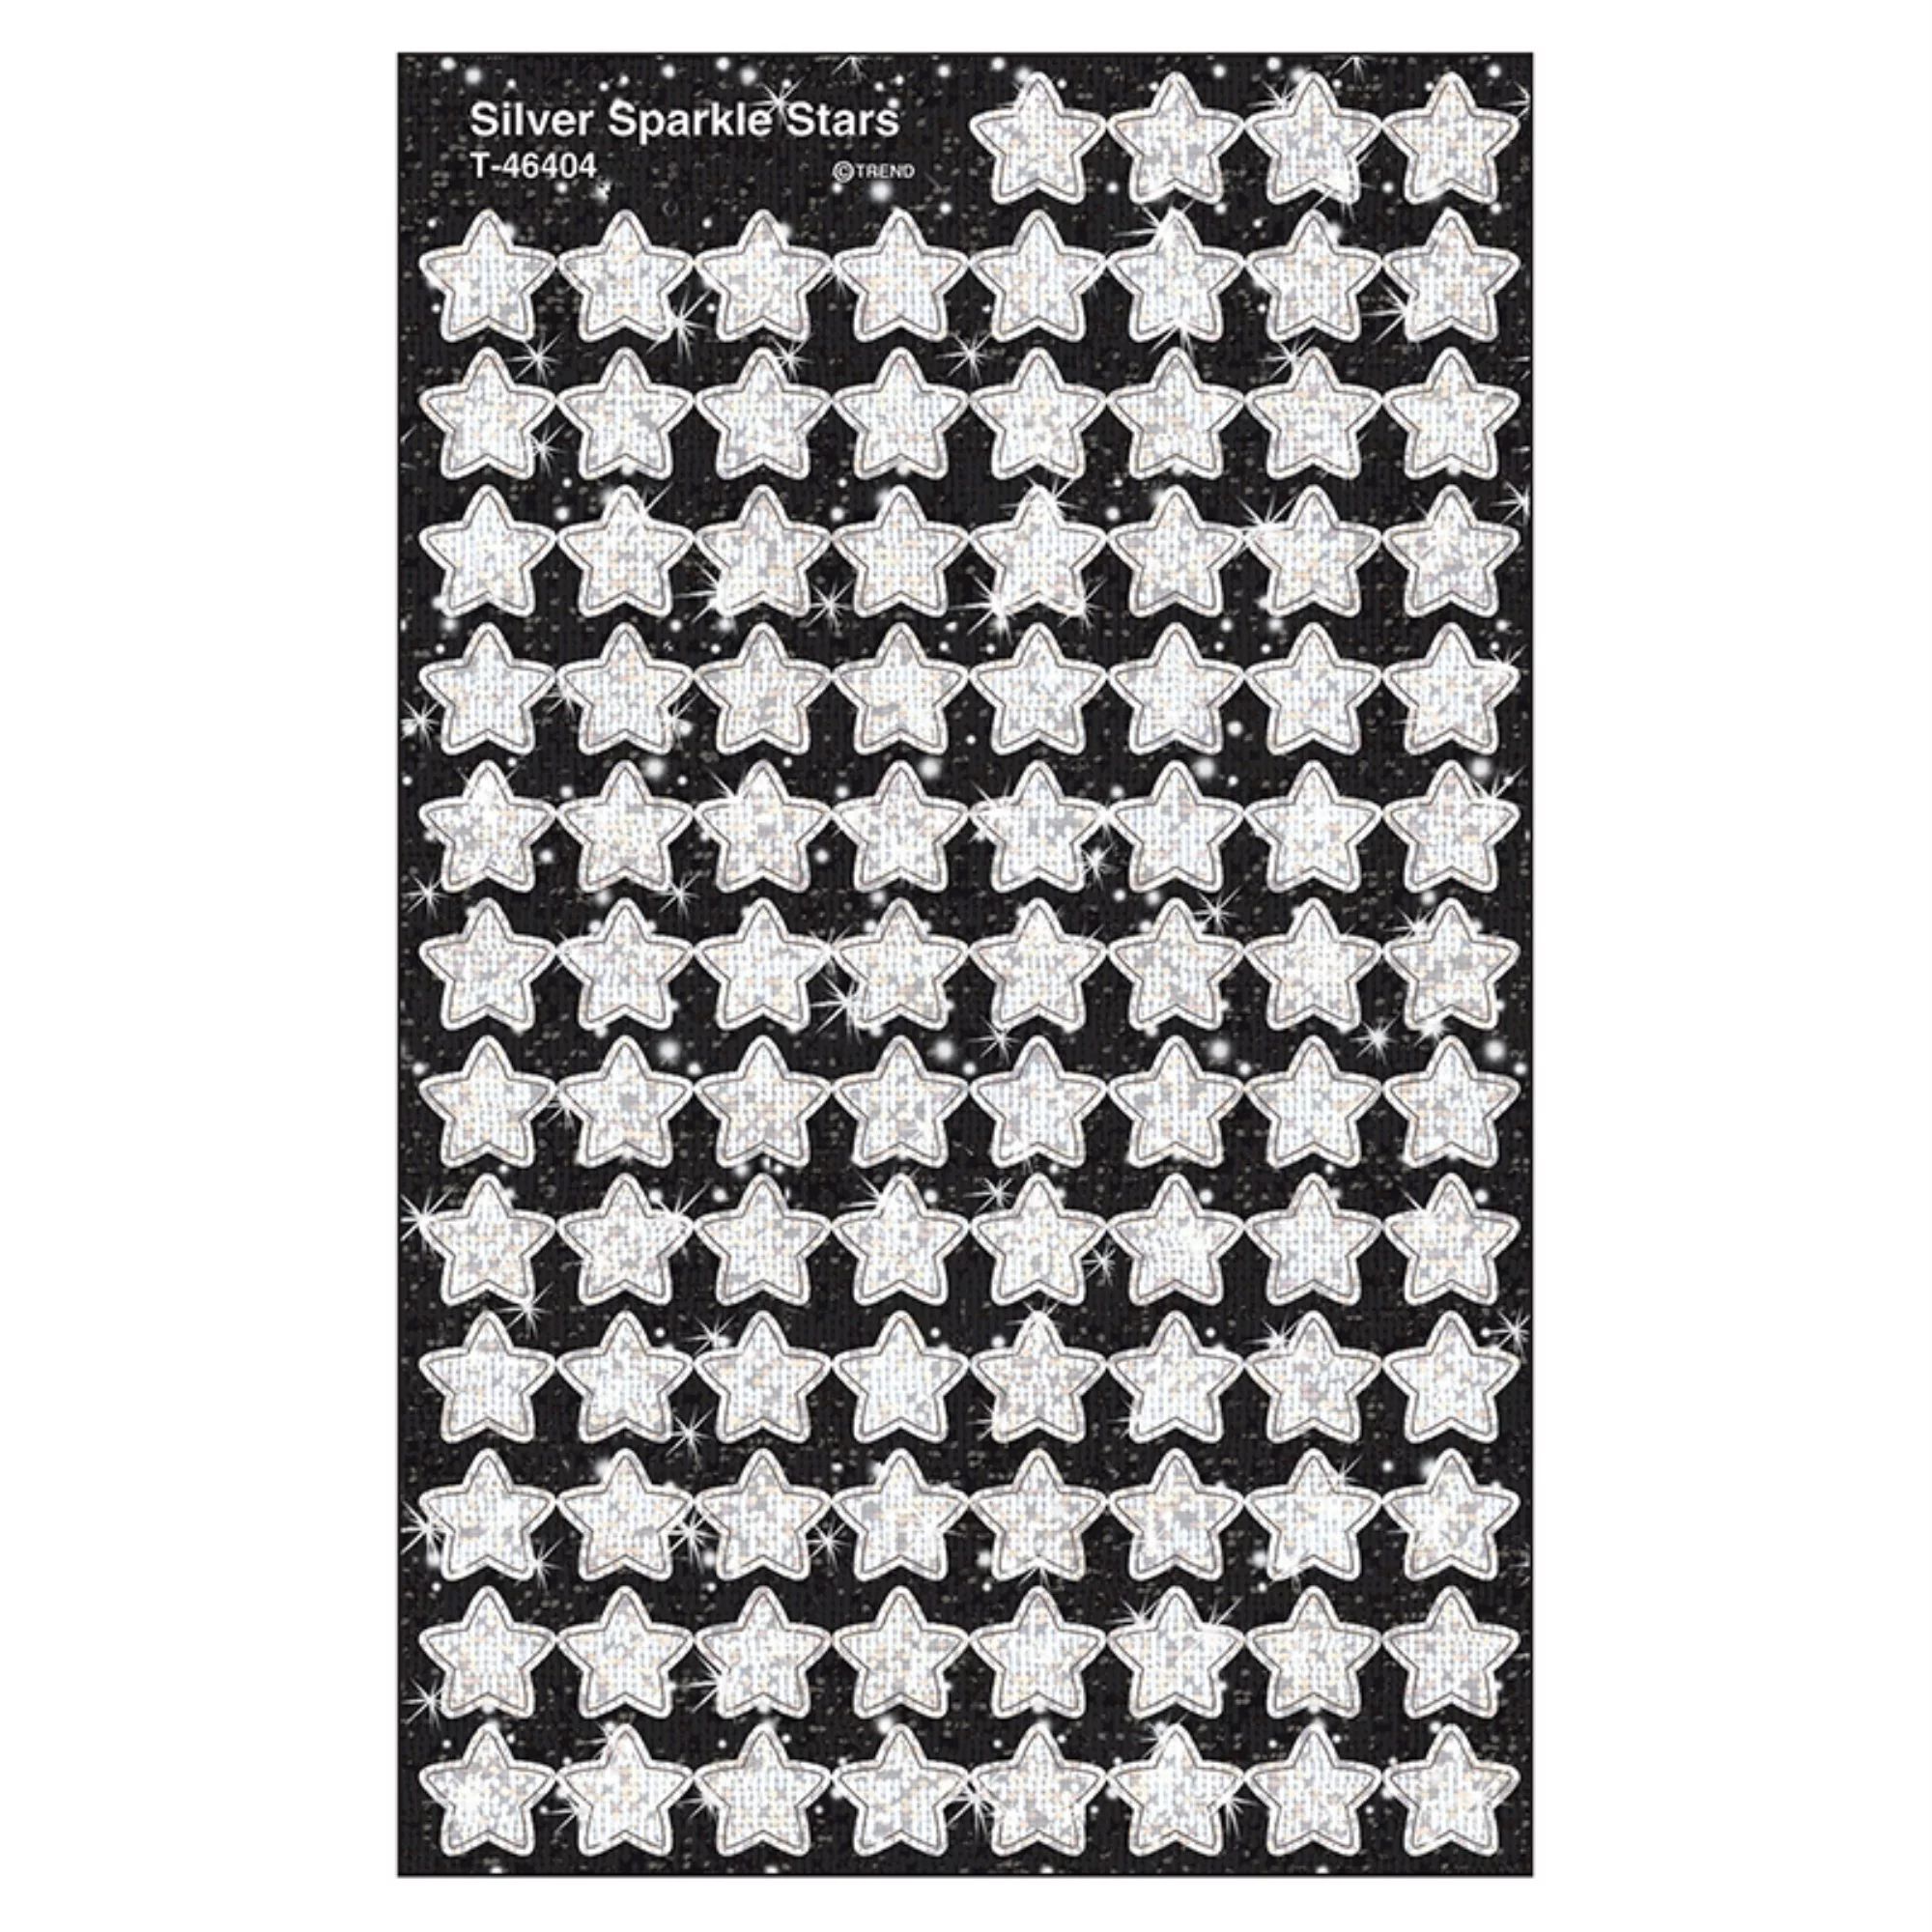 Trend Silver Sparkle Stars superShapes Stickers, Silver, 400 / Pack (Quantity) | Walmart (US)